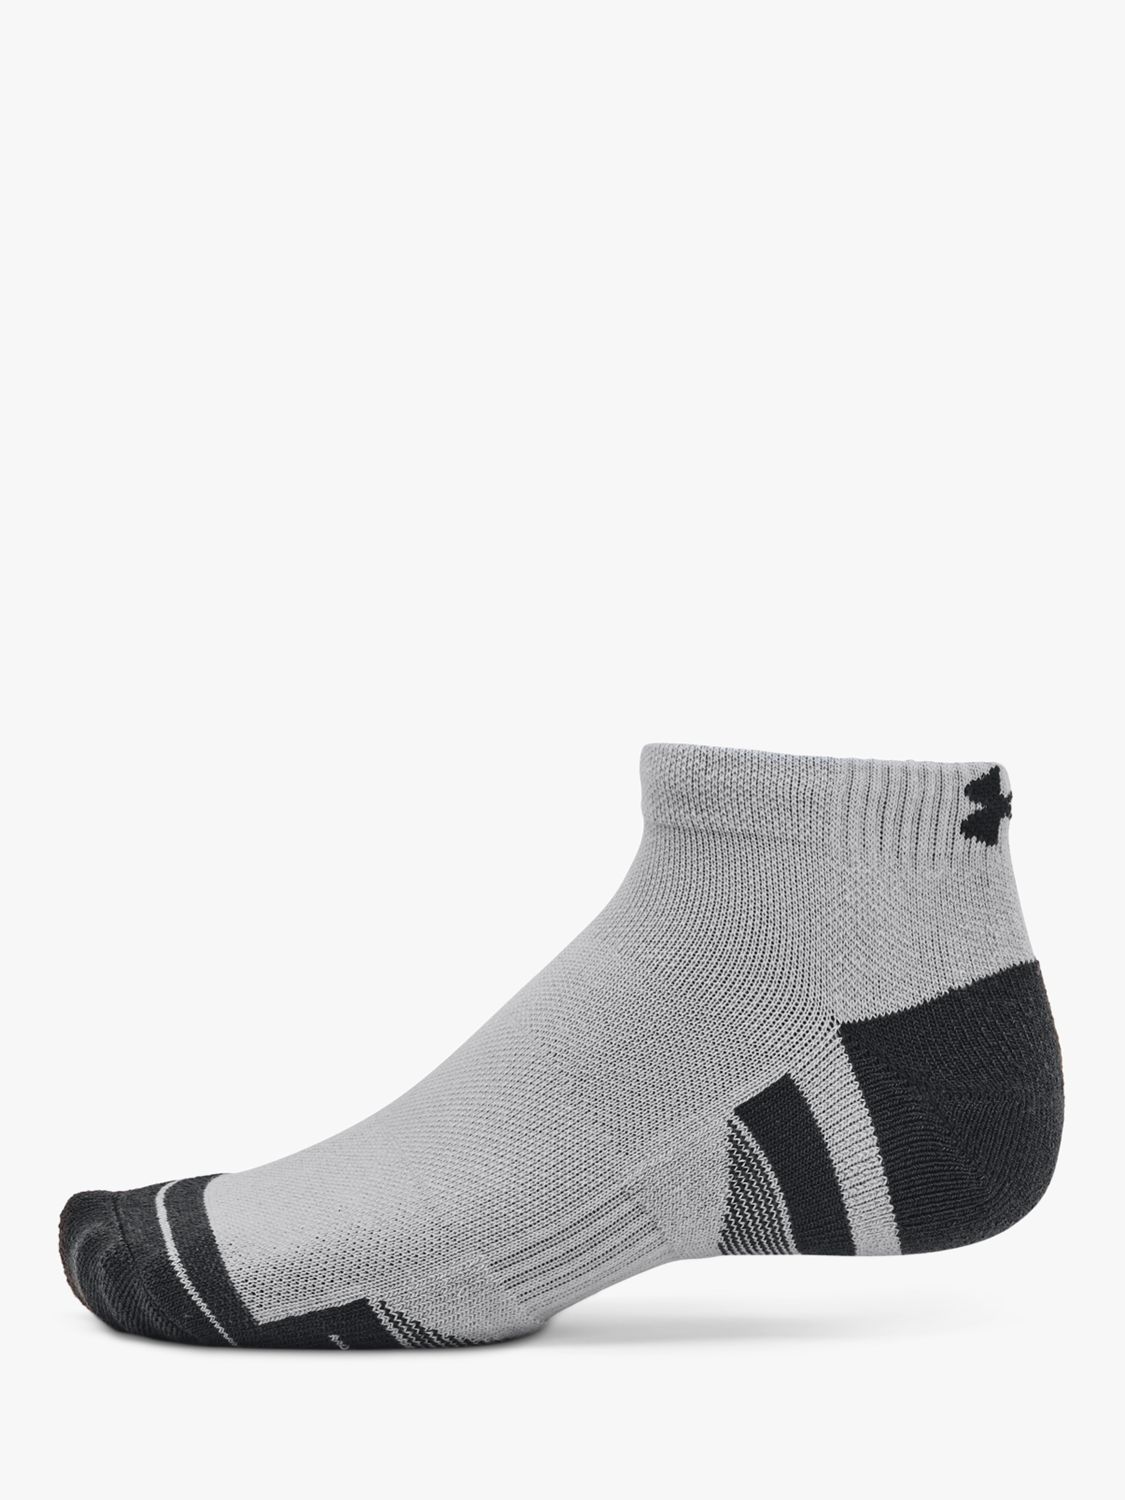 Under Armour Performance Tech Low Cut Socks, Pack of 3, Mod Gray/White/Jet Gray, M